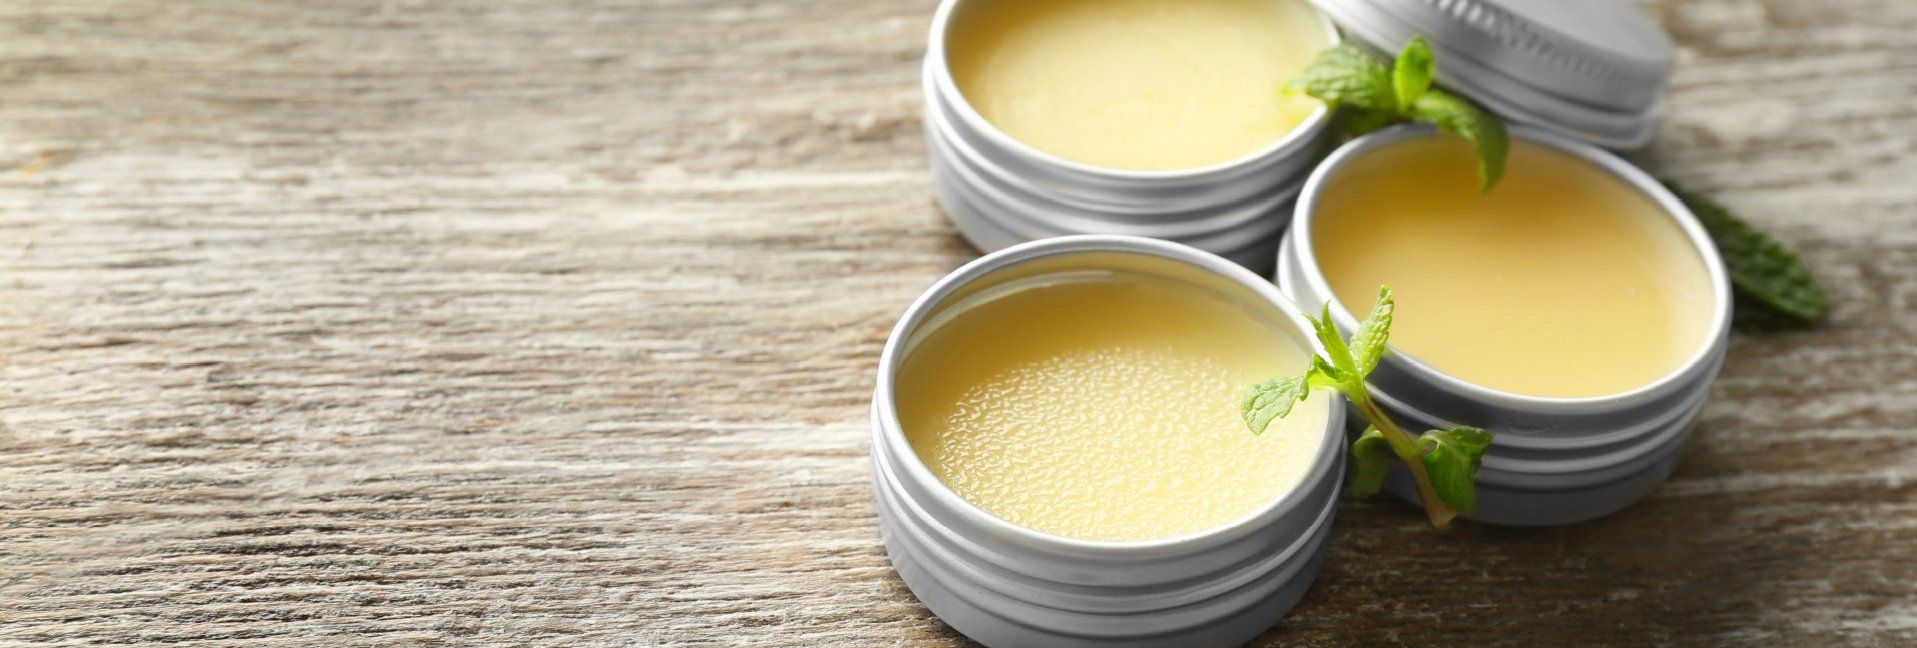 How to make an herbal salve to cure what ails you